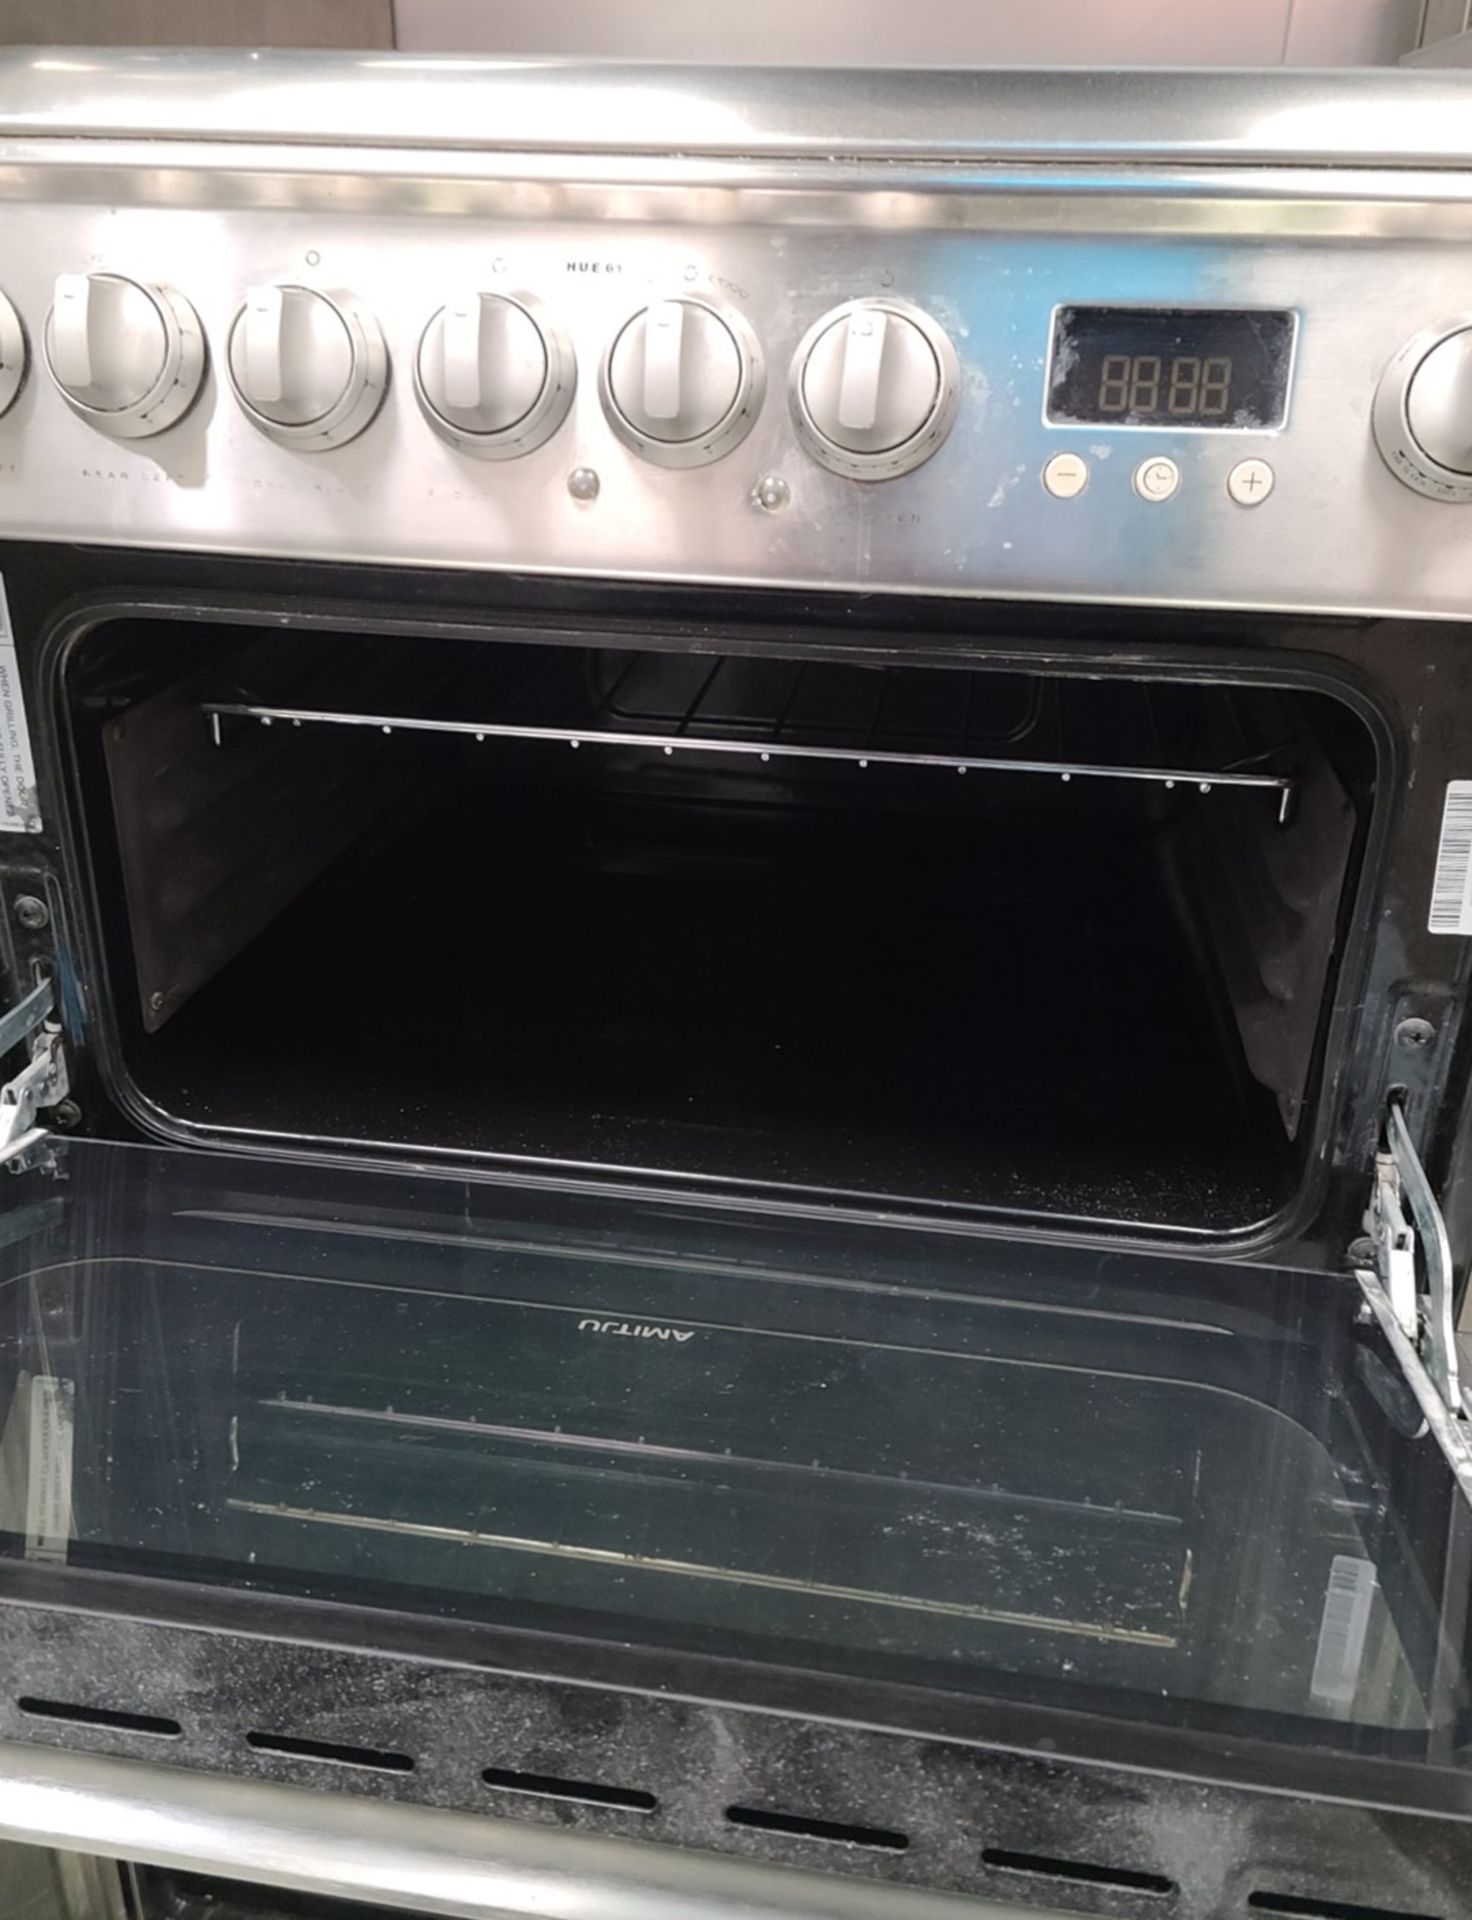 1 x Hotpoint HUI611X Electric Cooker With Double Oven, Four Burner Hob and Stainless Steel Finish - Image 7 of 9